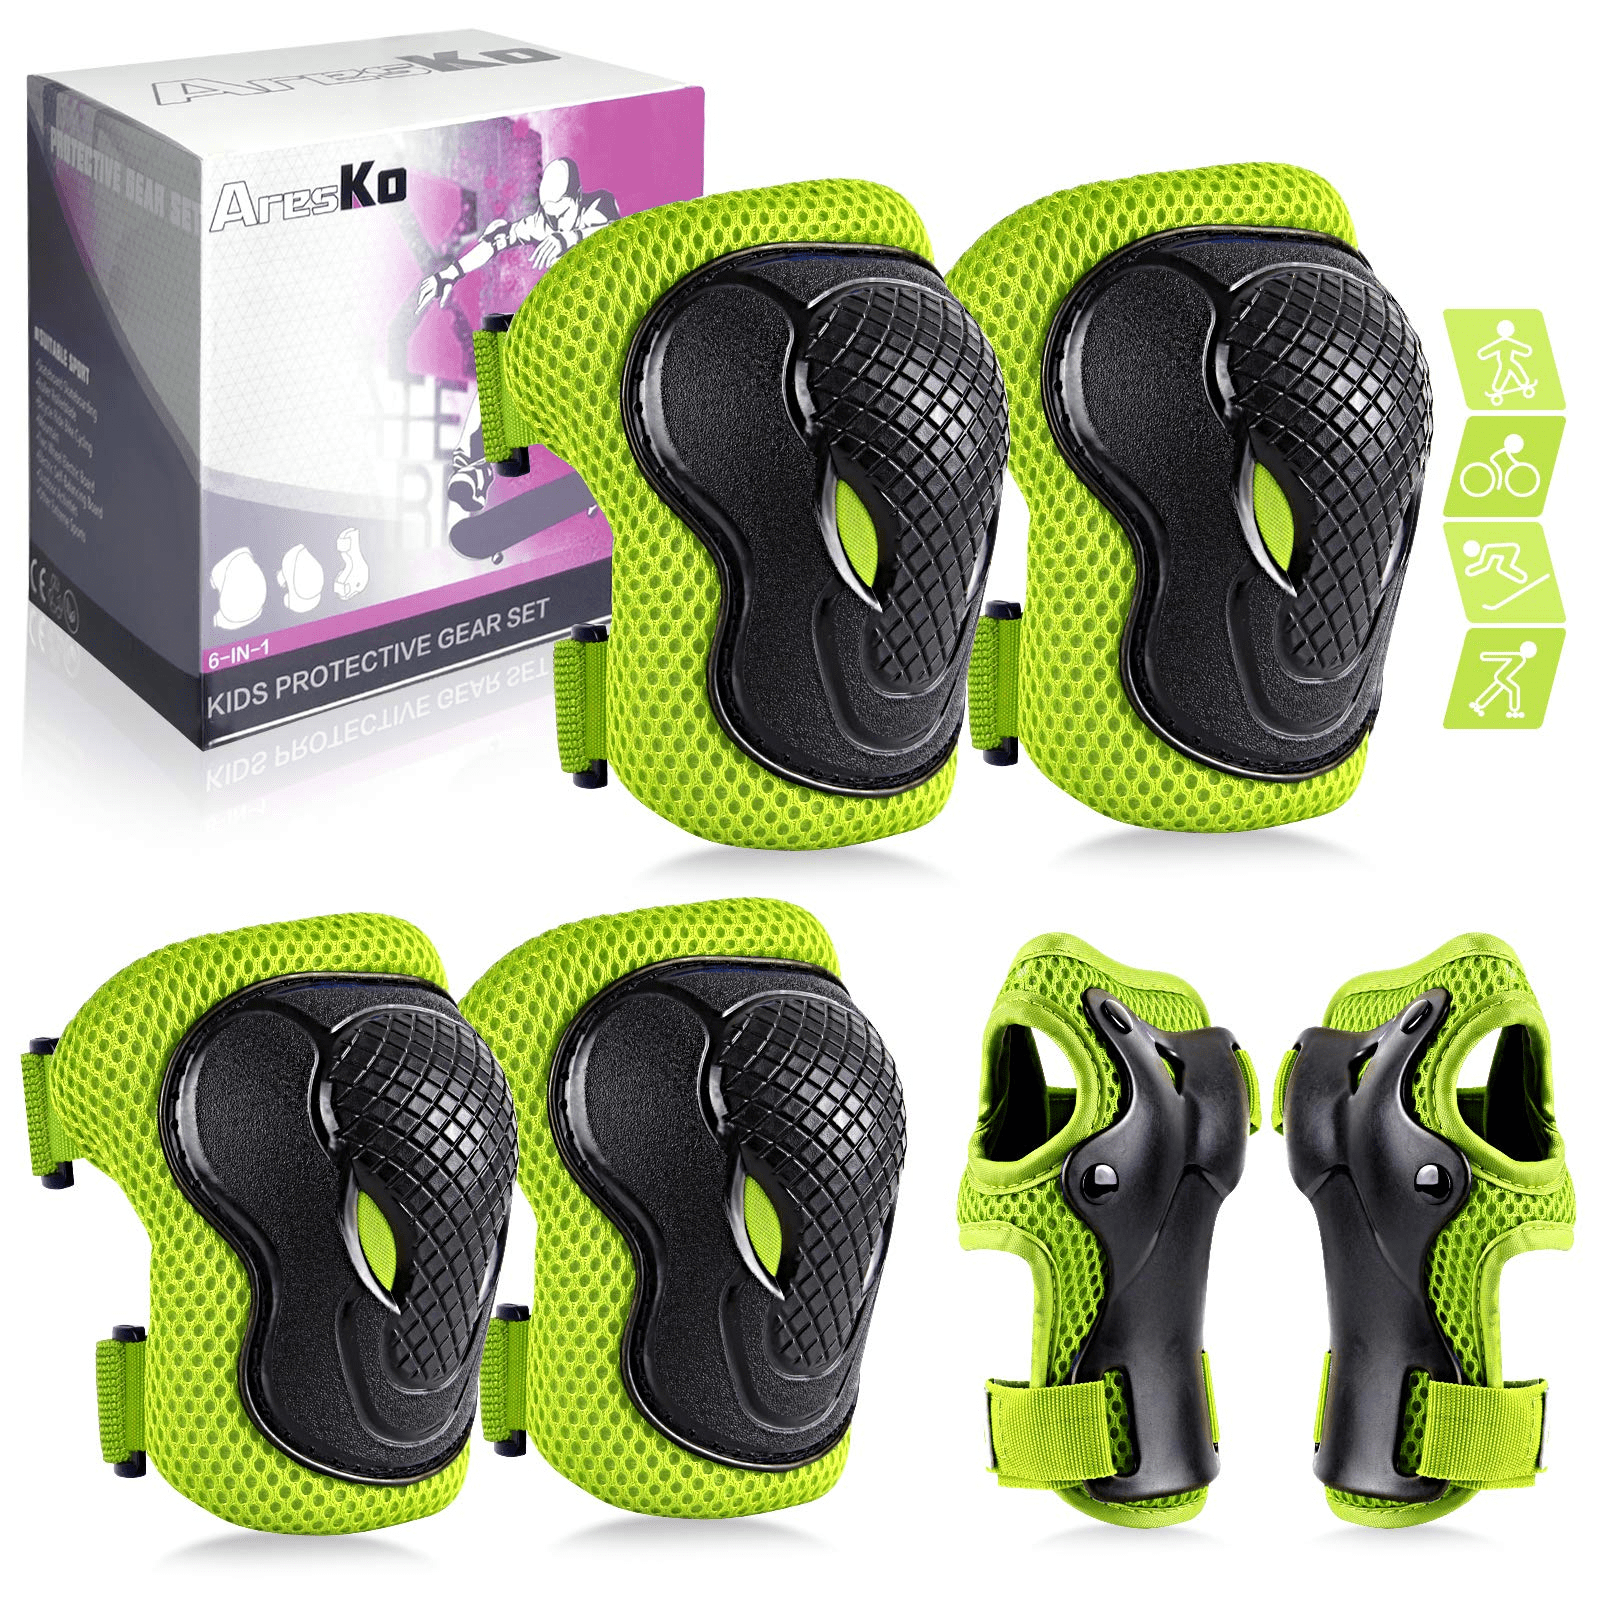 Details about   Child/Youth Knee Pad Elbow Pads Guards Protective Gear Set for Roller Skates 